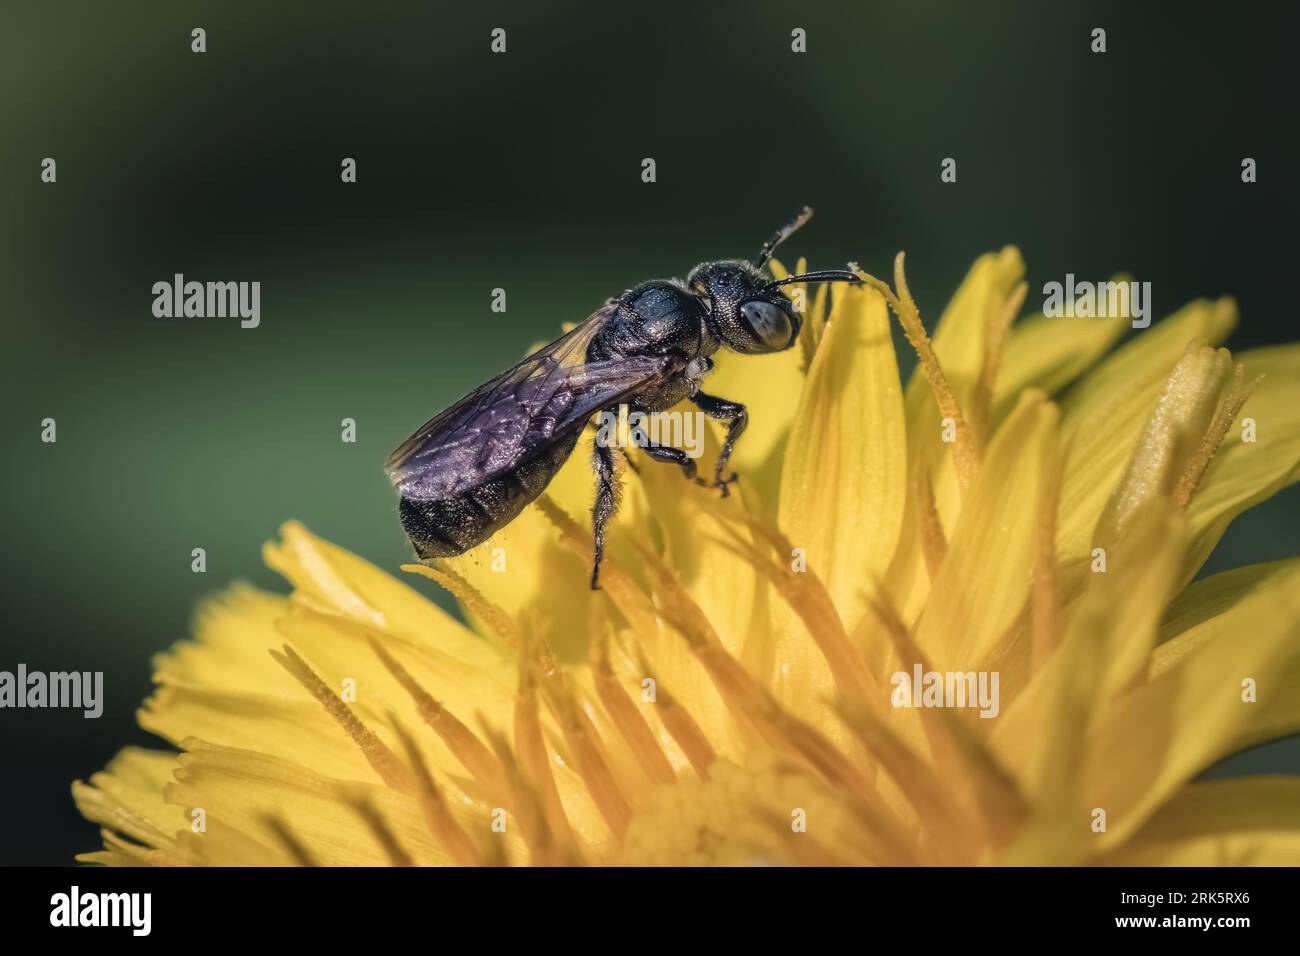 Macro of a Tiny Small Carpenter Bee (Genus Ceratina) pollinating and foraging on a yellow dandelion wildflower, Long Island, New York, USA. Stock Photo